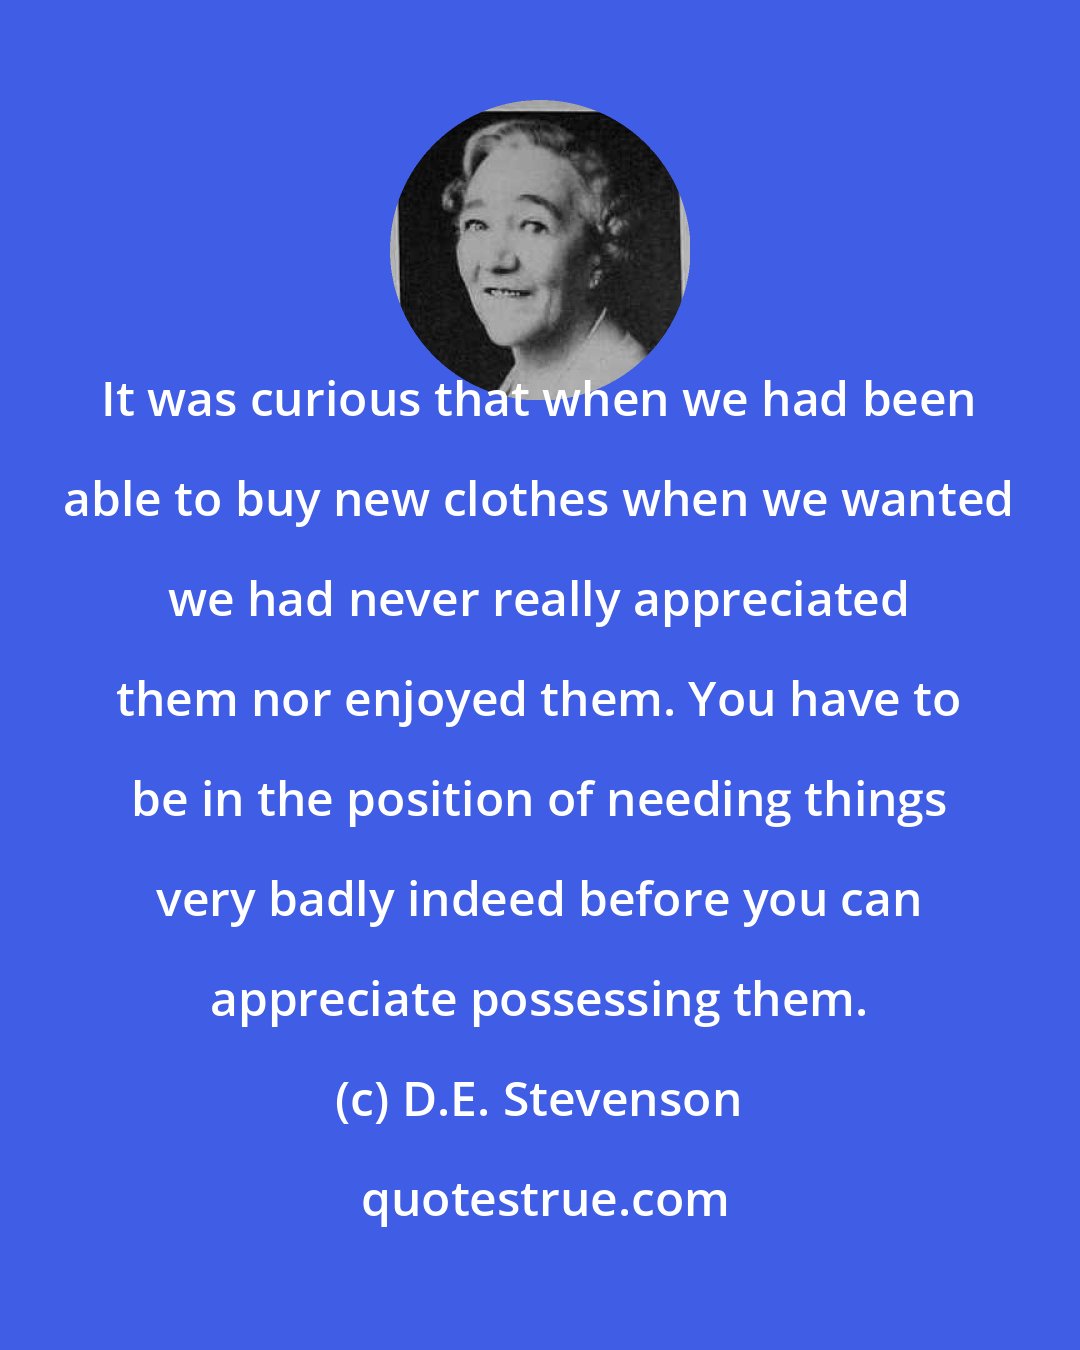 D.E. Stevenson: It was curious that when we had been able to buy new clothes when we wanted we had never really appreciated them nor enjoyed them. You have to be in the position of needing things very badly indeed before you can appreciate possessing them.